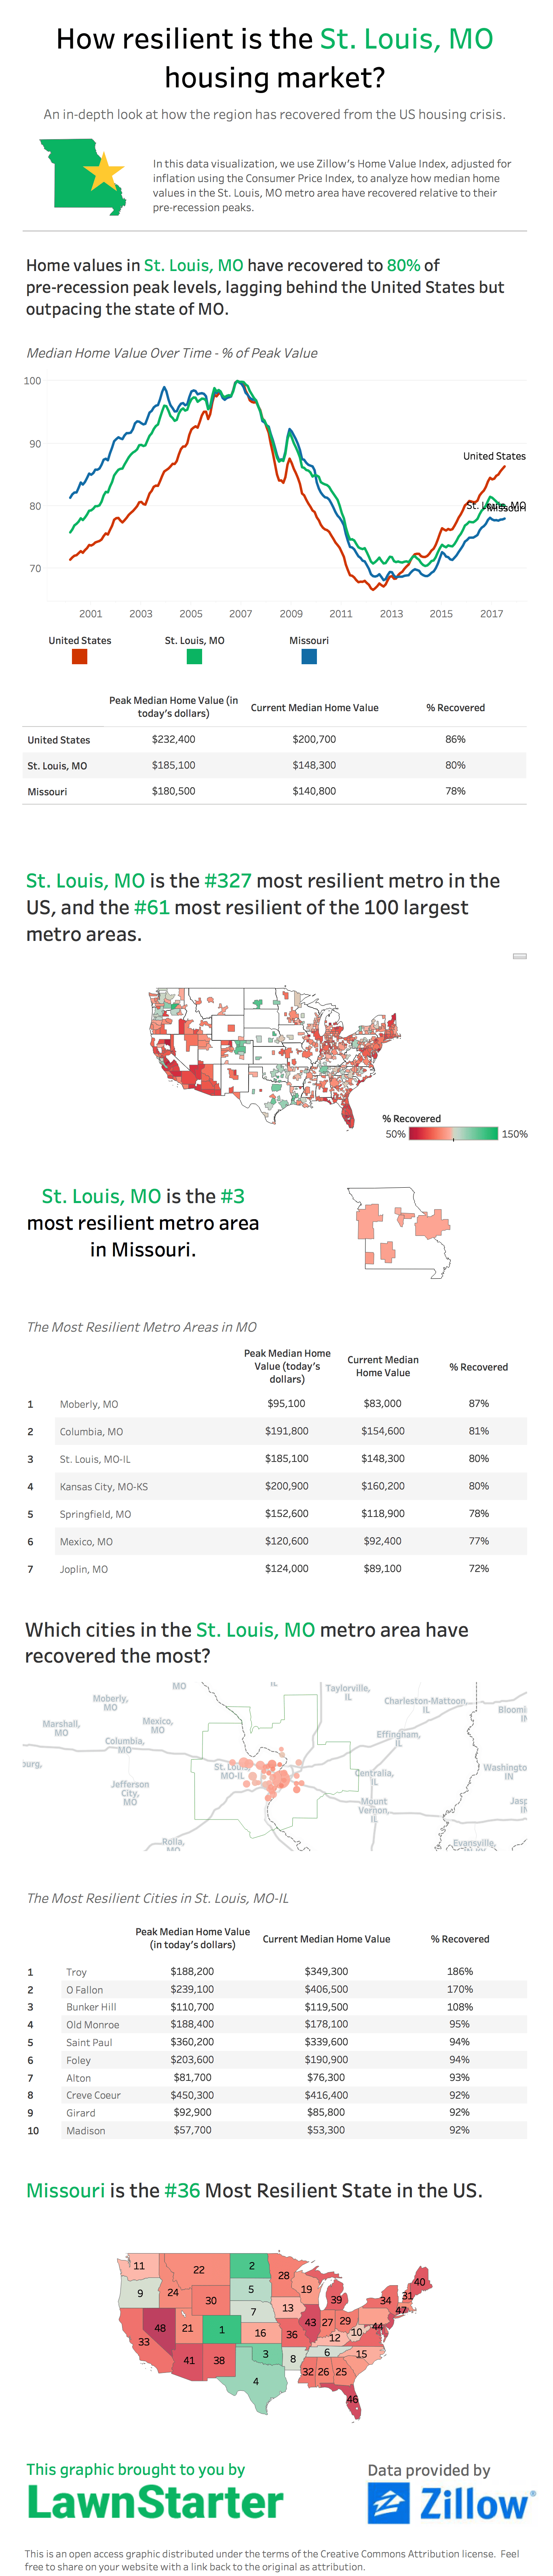 How resilient is the St. Louis, MO housing market? [infographic]